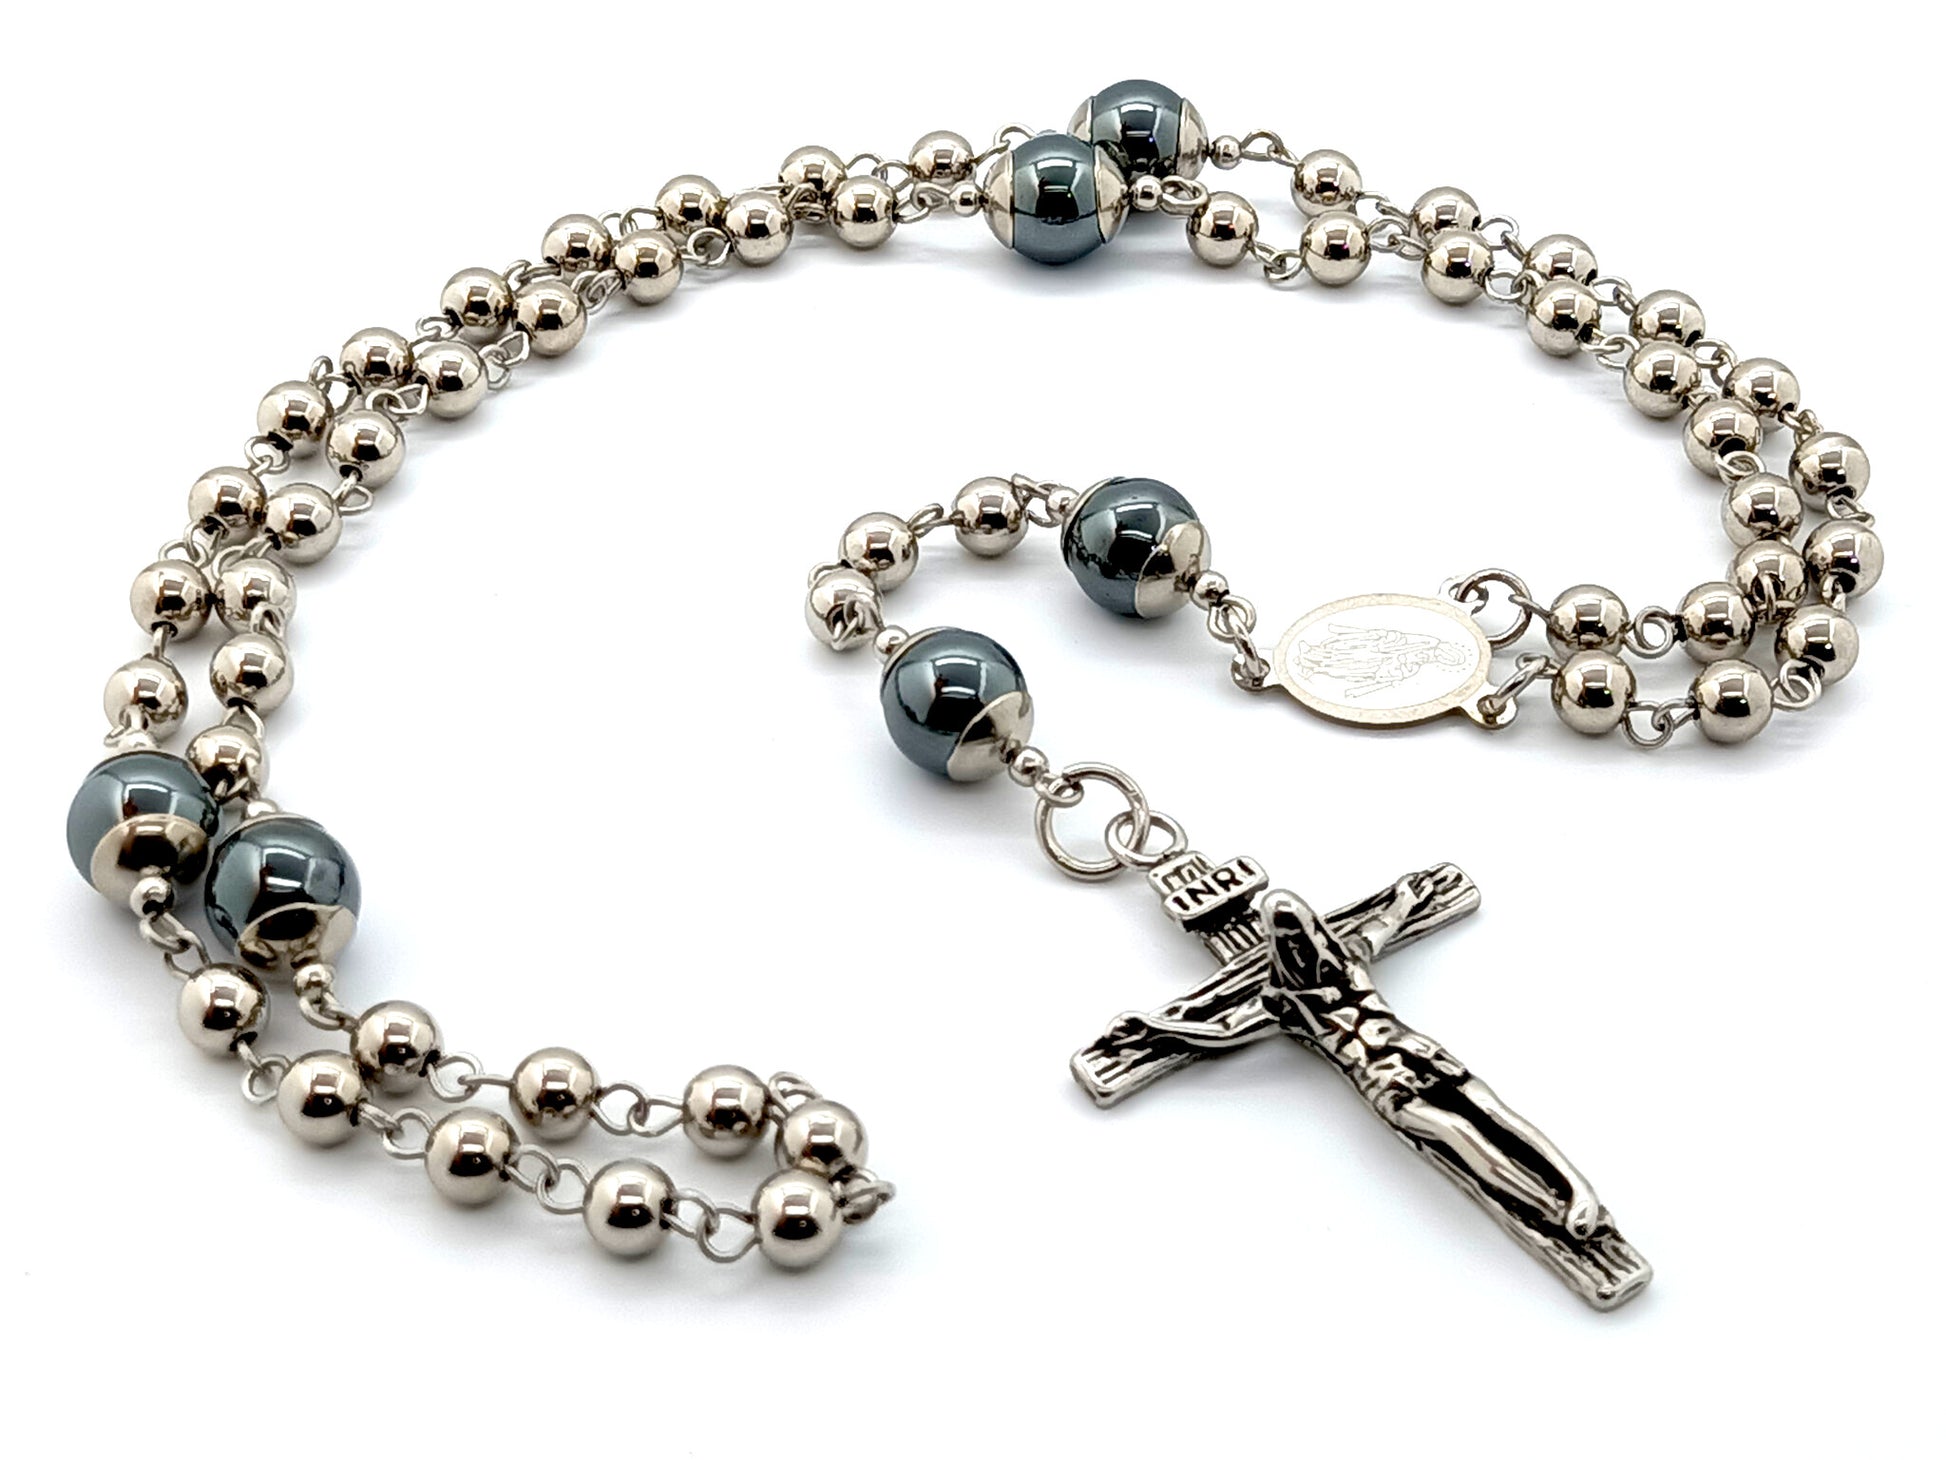 Miraculous medal unique rosary beads with hematite gemstone and stainless steel beads and stainless steel crucifix and medal.